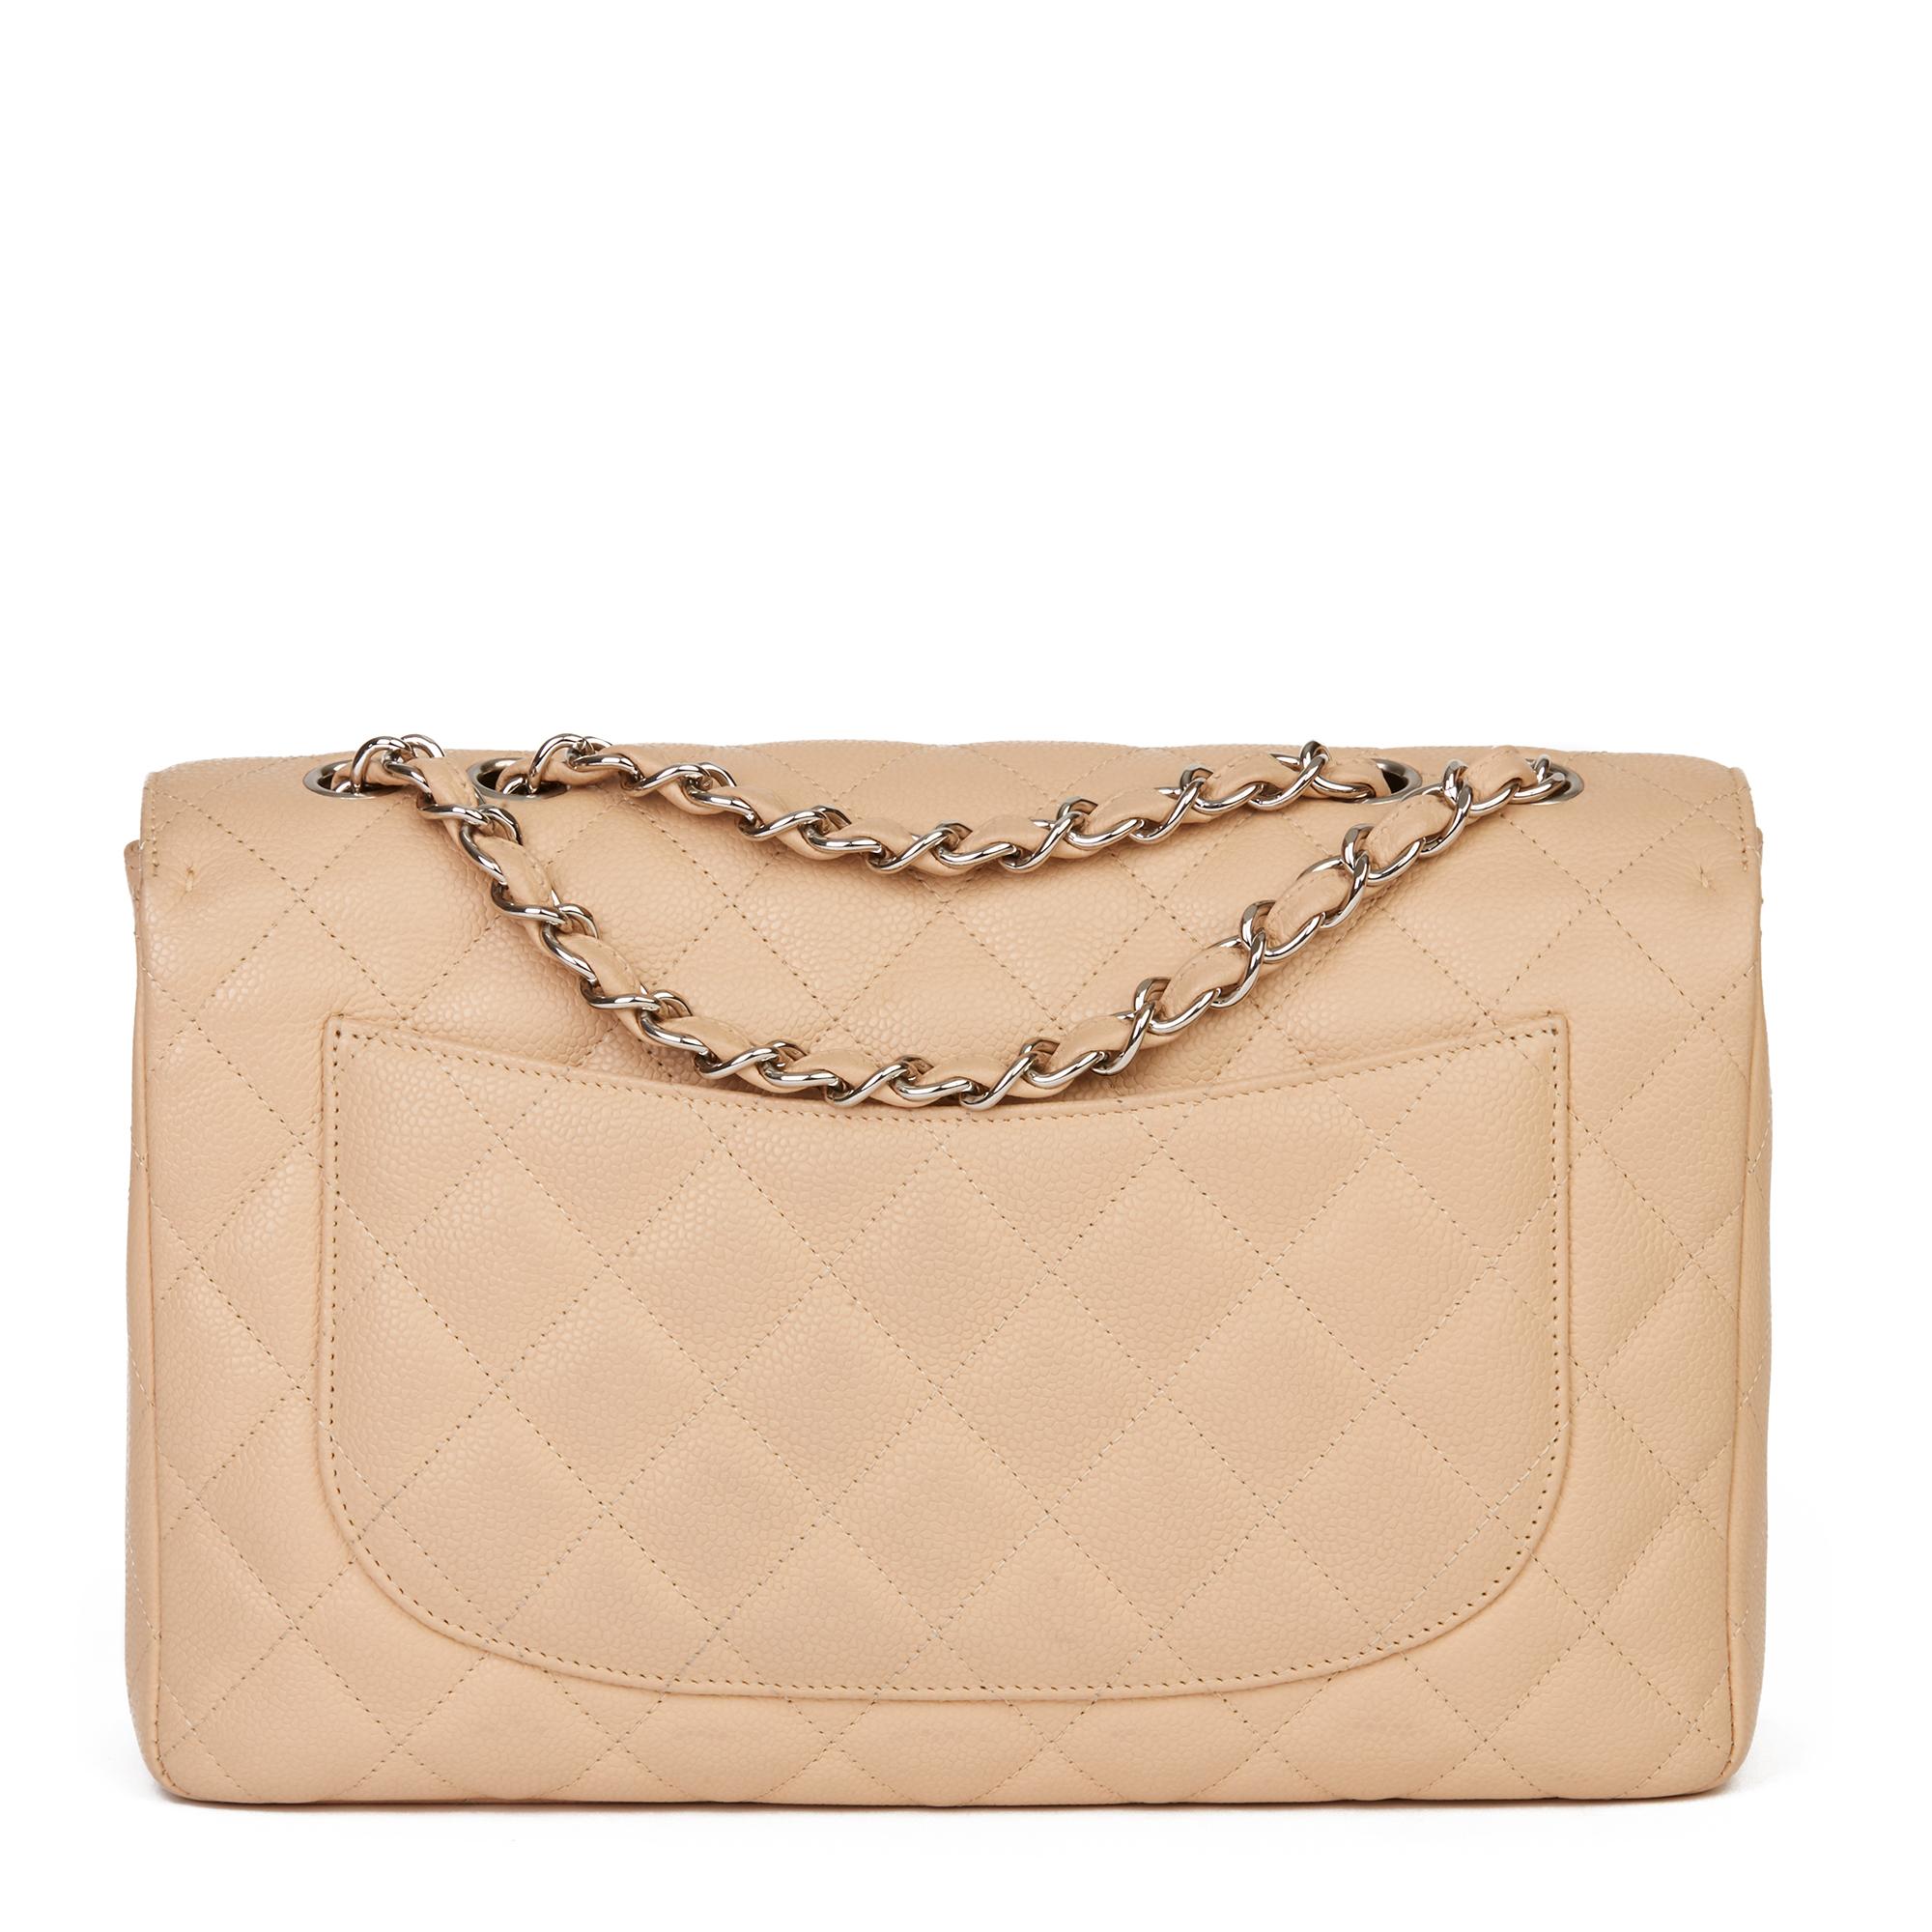 2010 Chanel Beige Quilted Caviar Leather Jumbo Classic Single Flap Bag ...